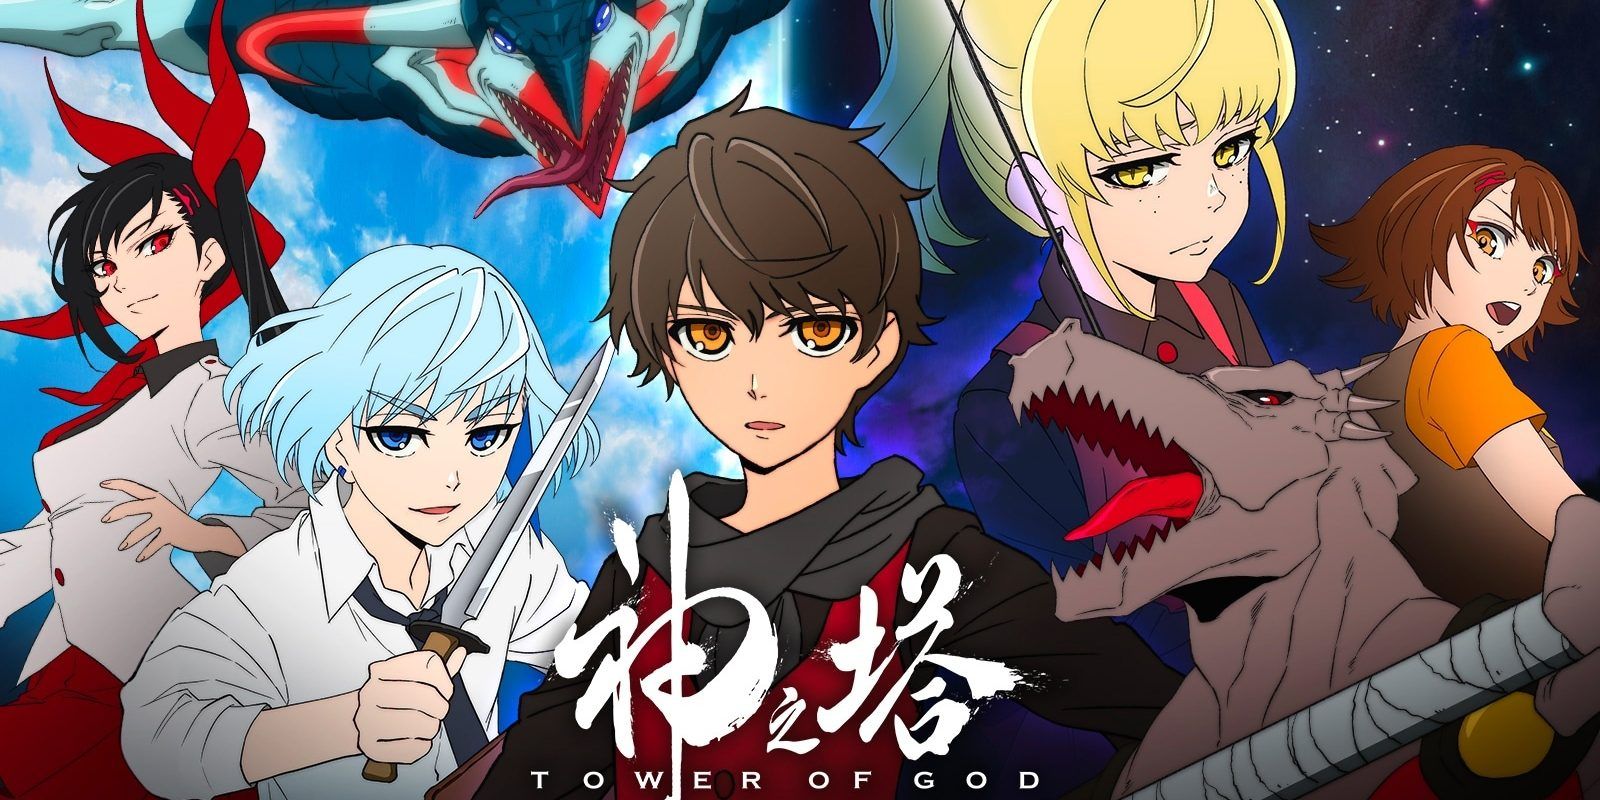 Print Editions of Manhwa, Beginning with Tower of God